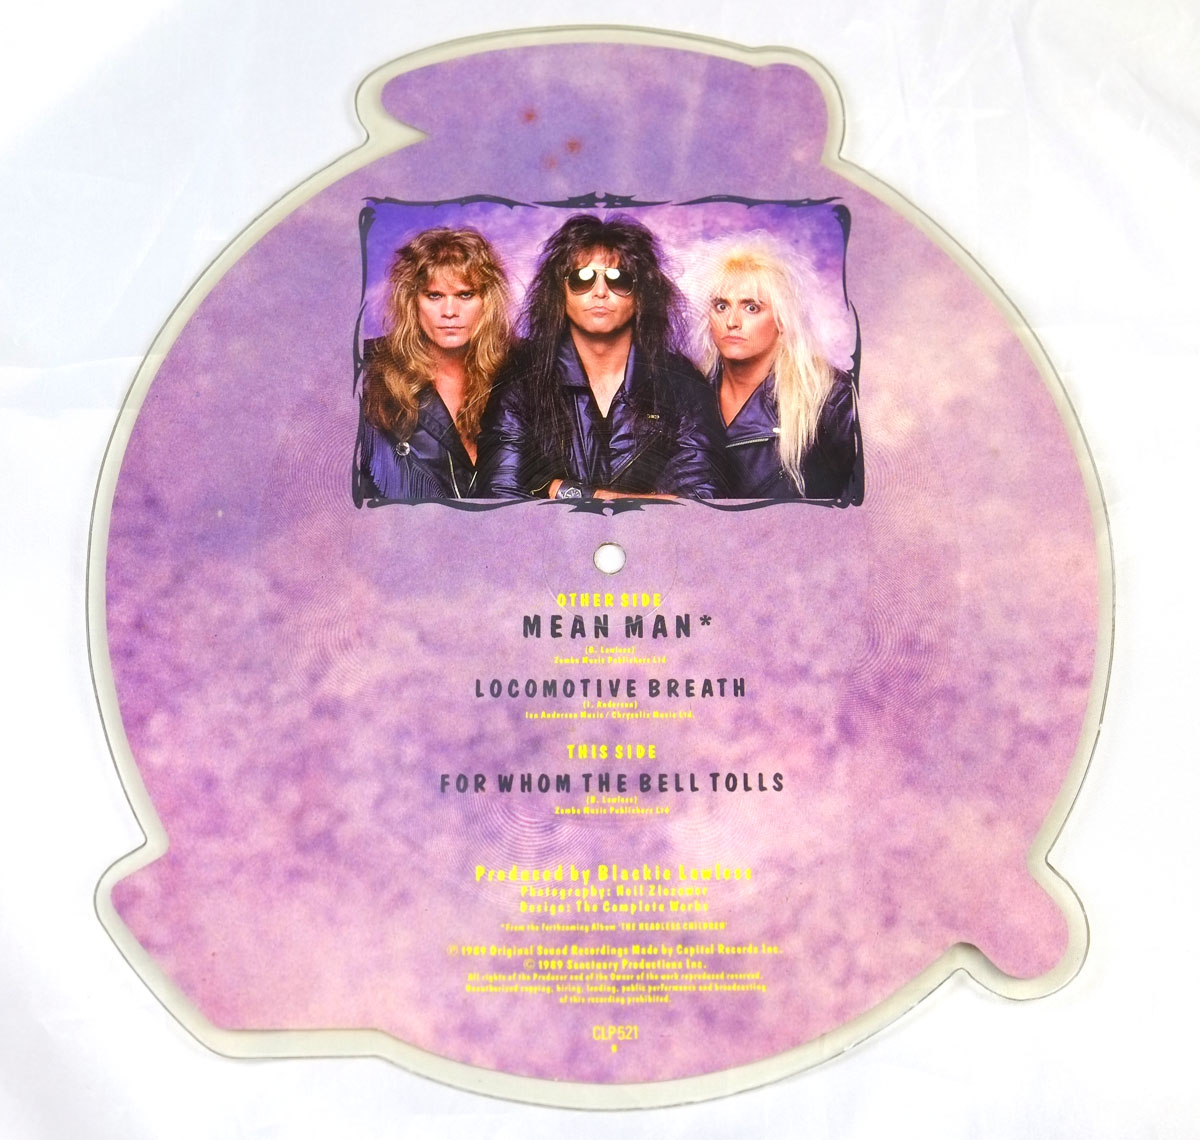 High Resolution Photos of wasp mean man picture disc 